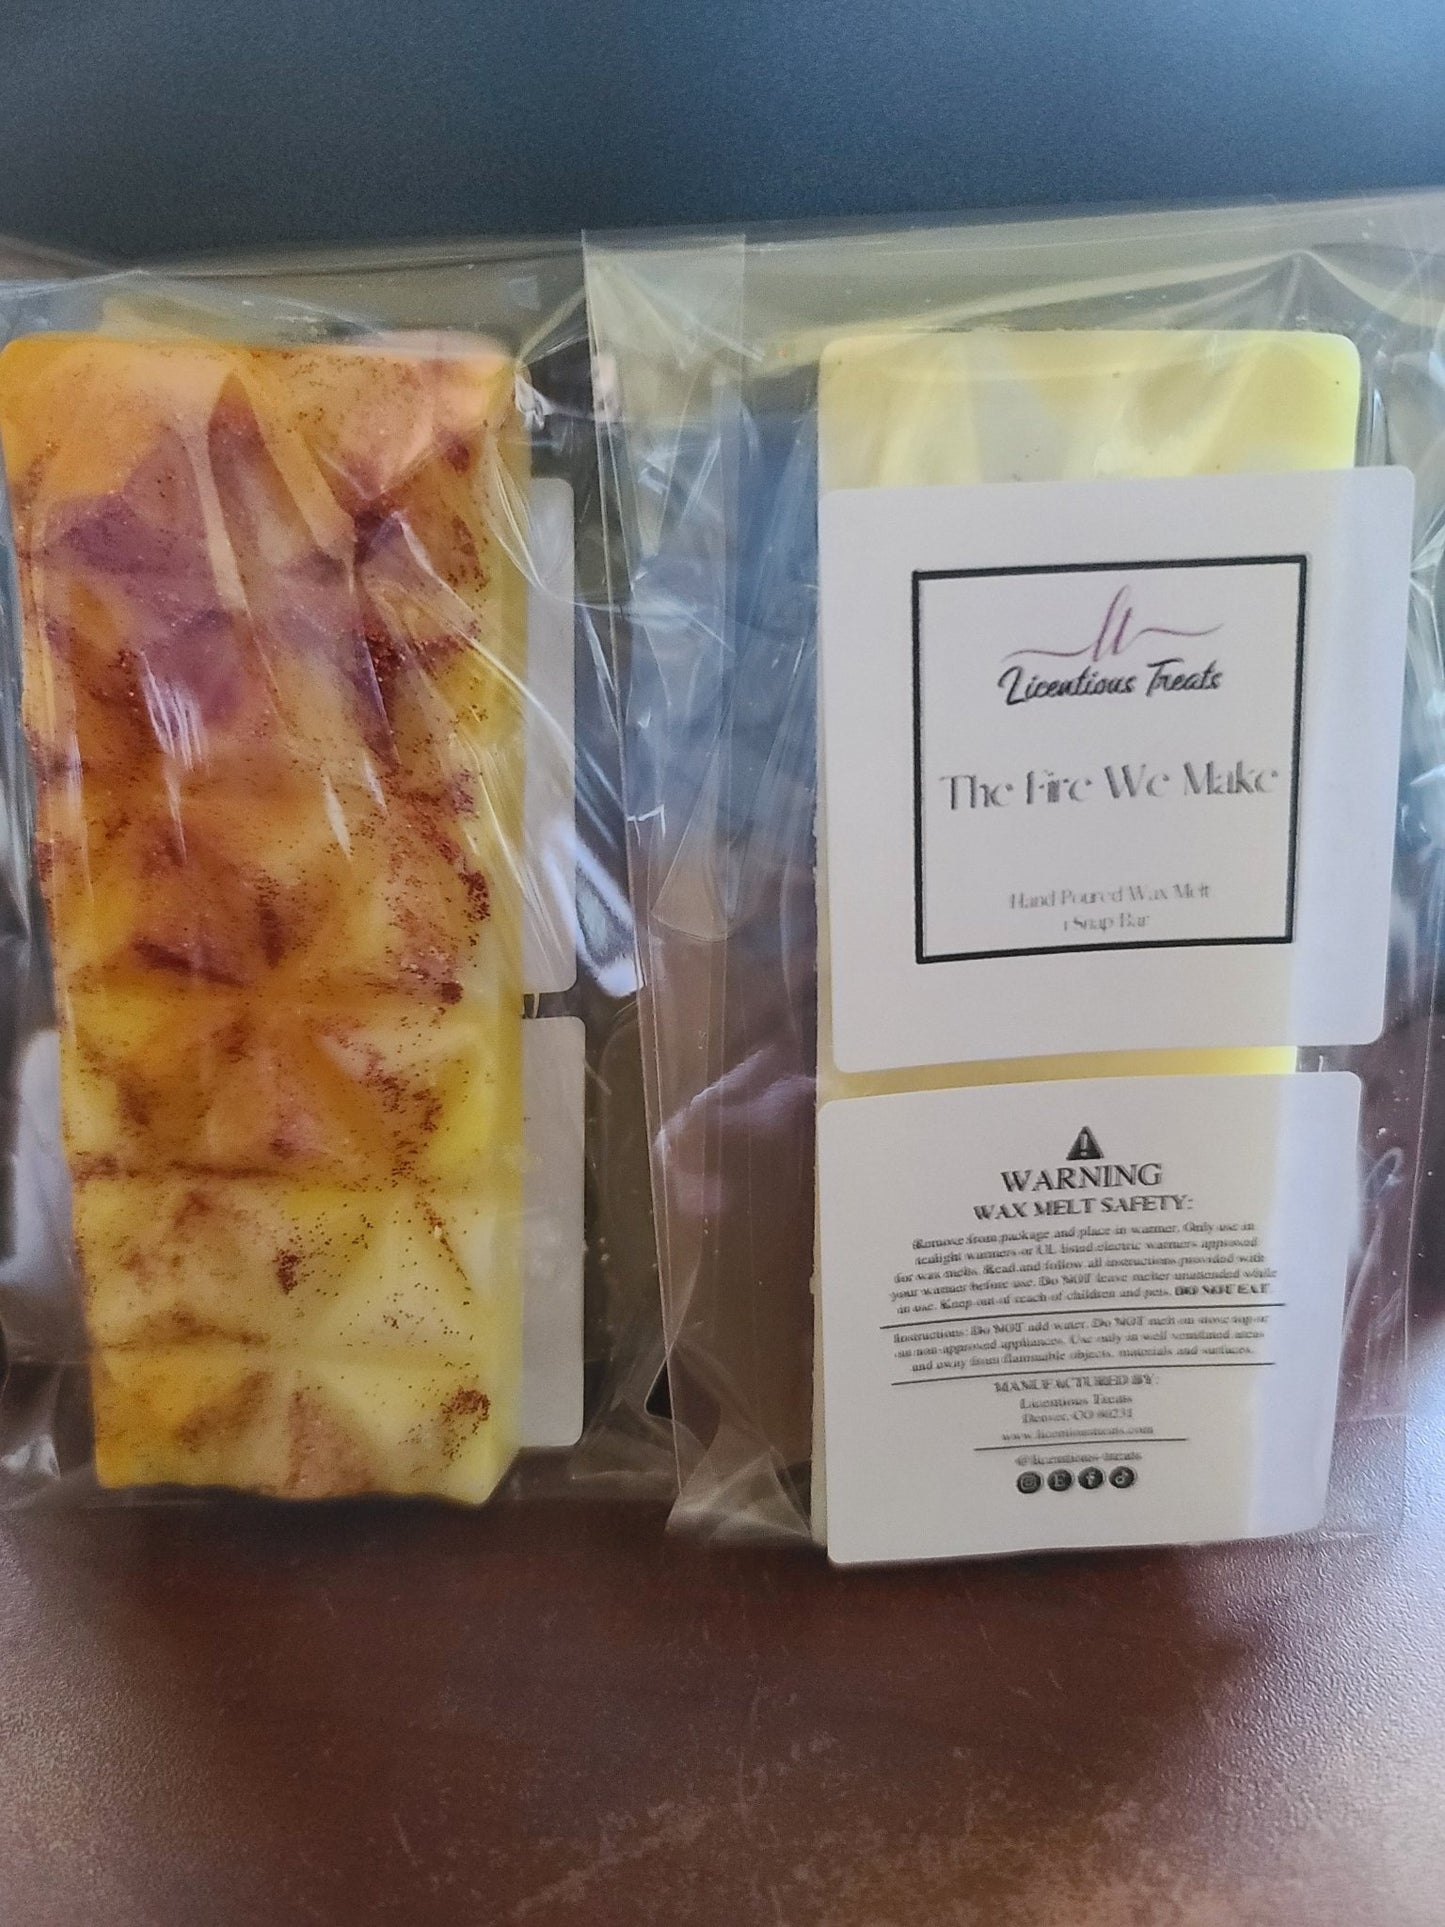 Wax Melts - The Fire We Make - Licentious TreatsWax Melts - The Fire We Make